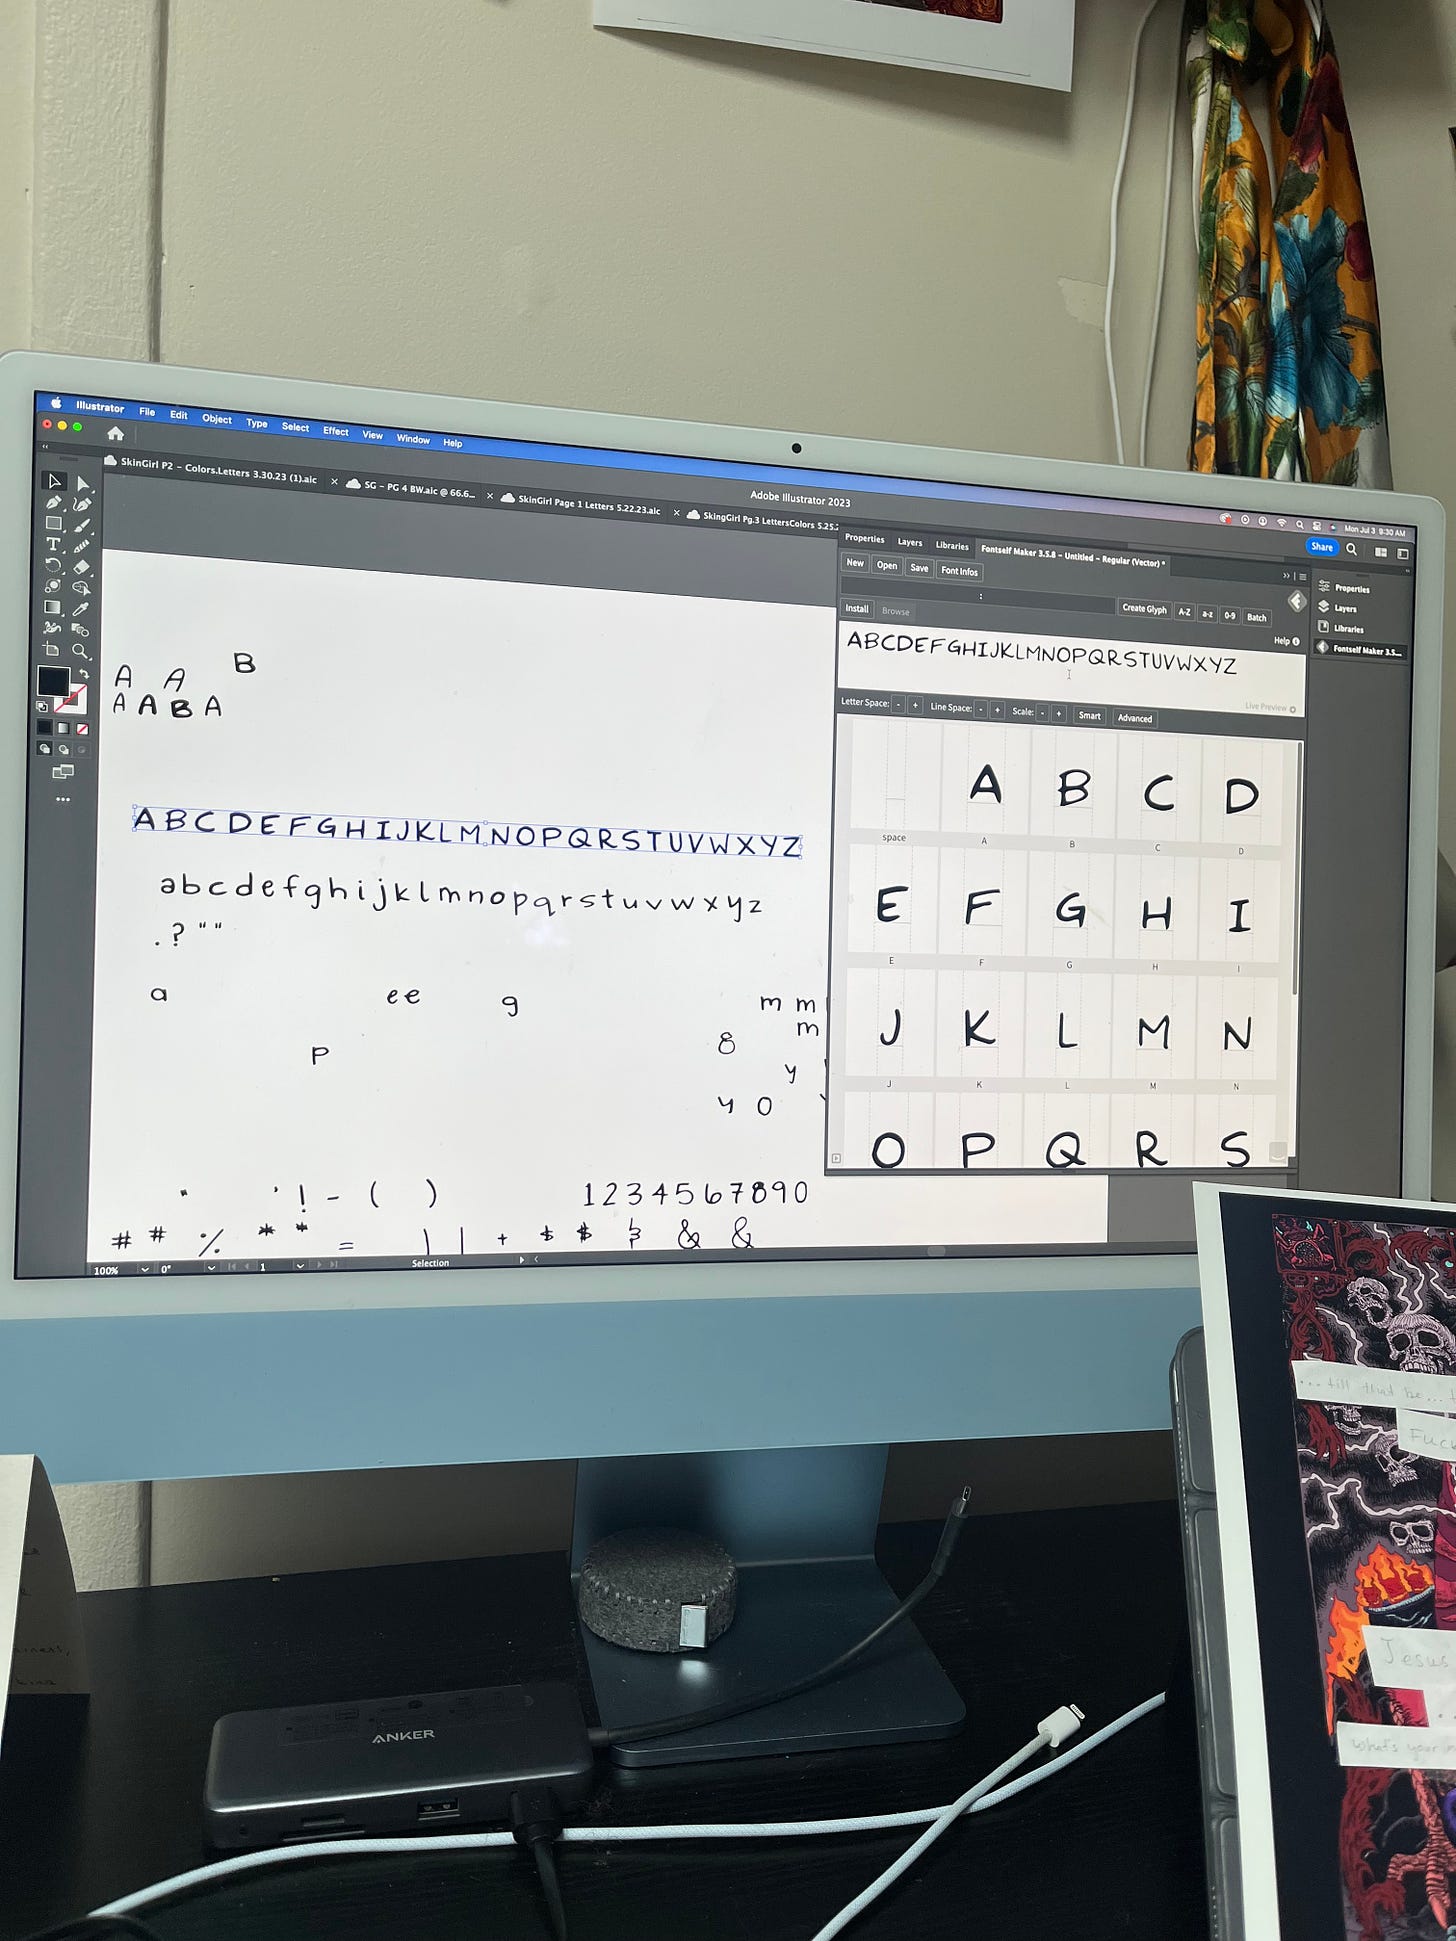 the same computer screen, but the individual letters are now on a different window, in individual boxes